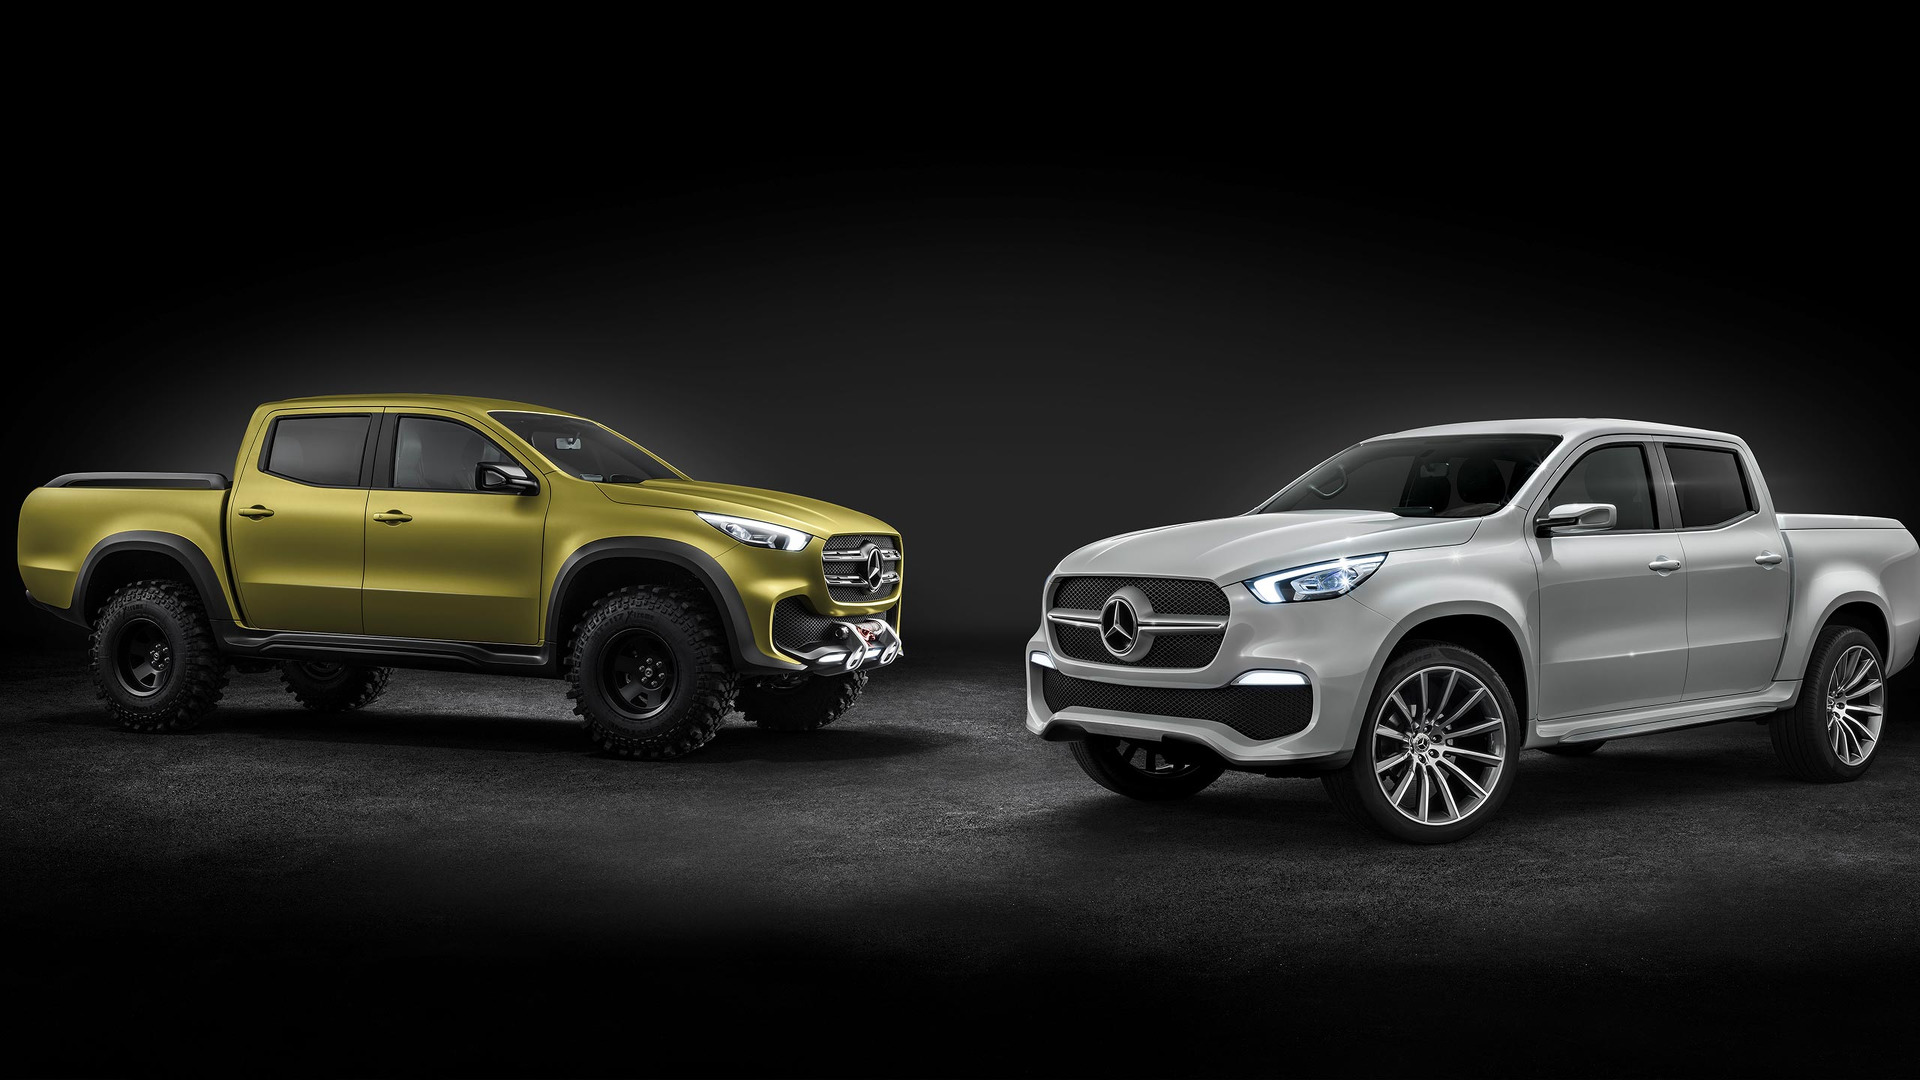 MercedesBenz pickup concept revealed, will become XClass  PerformanceDrive